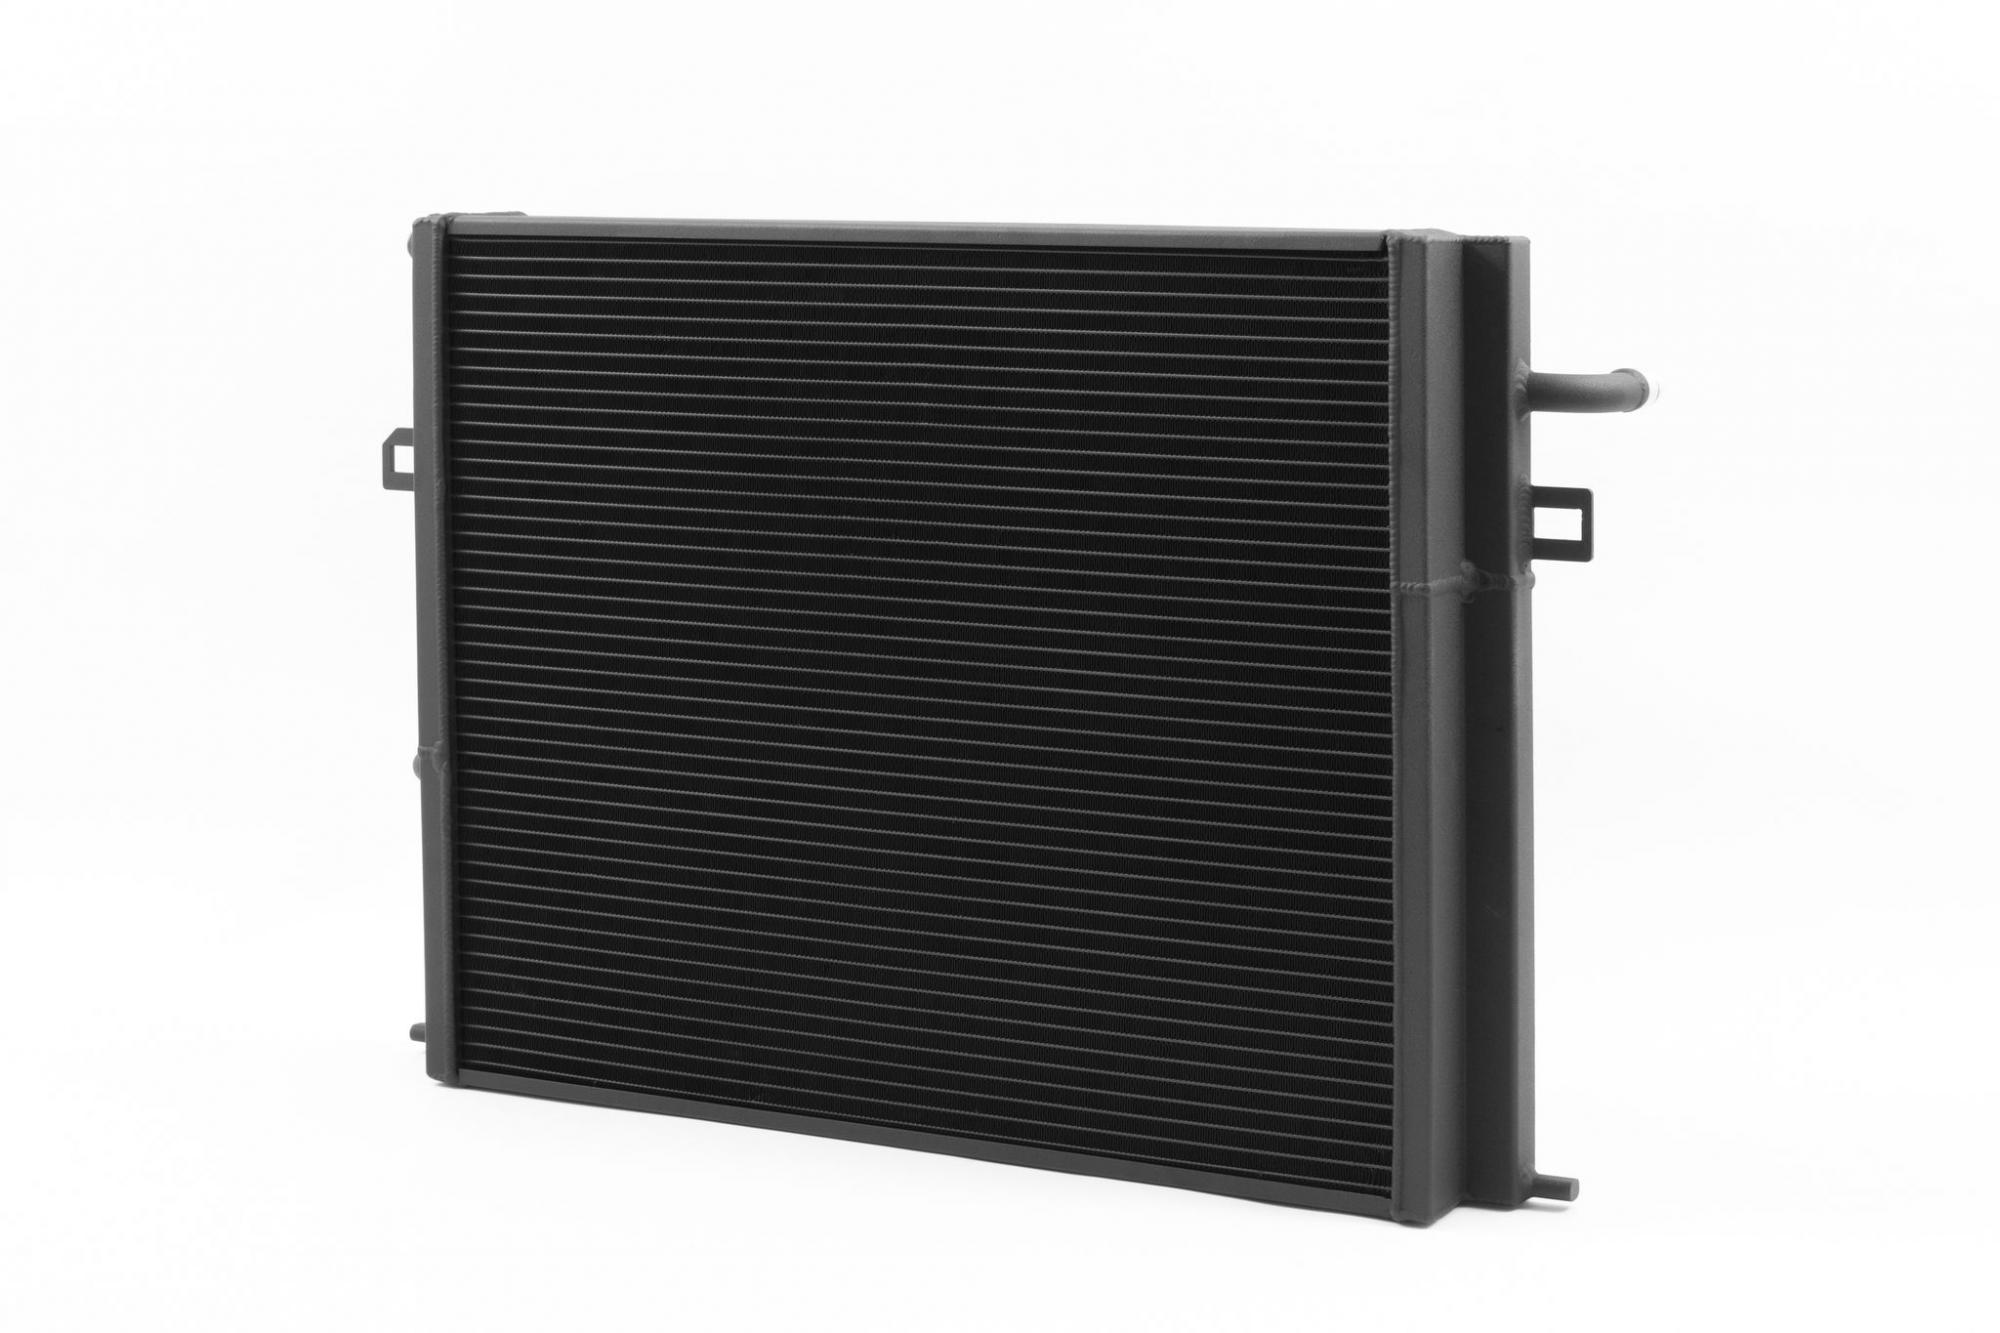 a-zperformance-chargecooler-radiator-for-the-bmw-b48-b58-engine